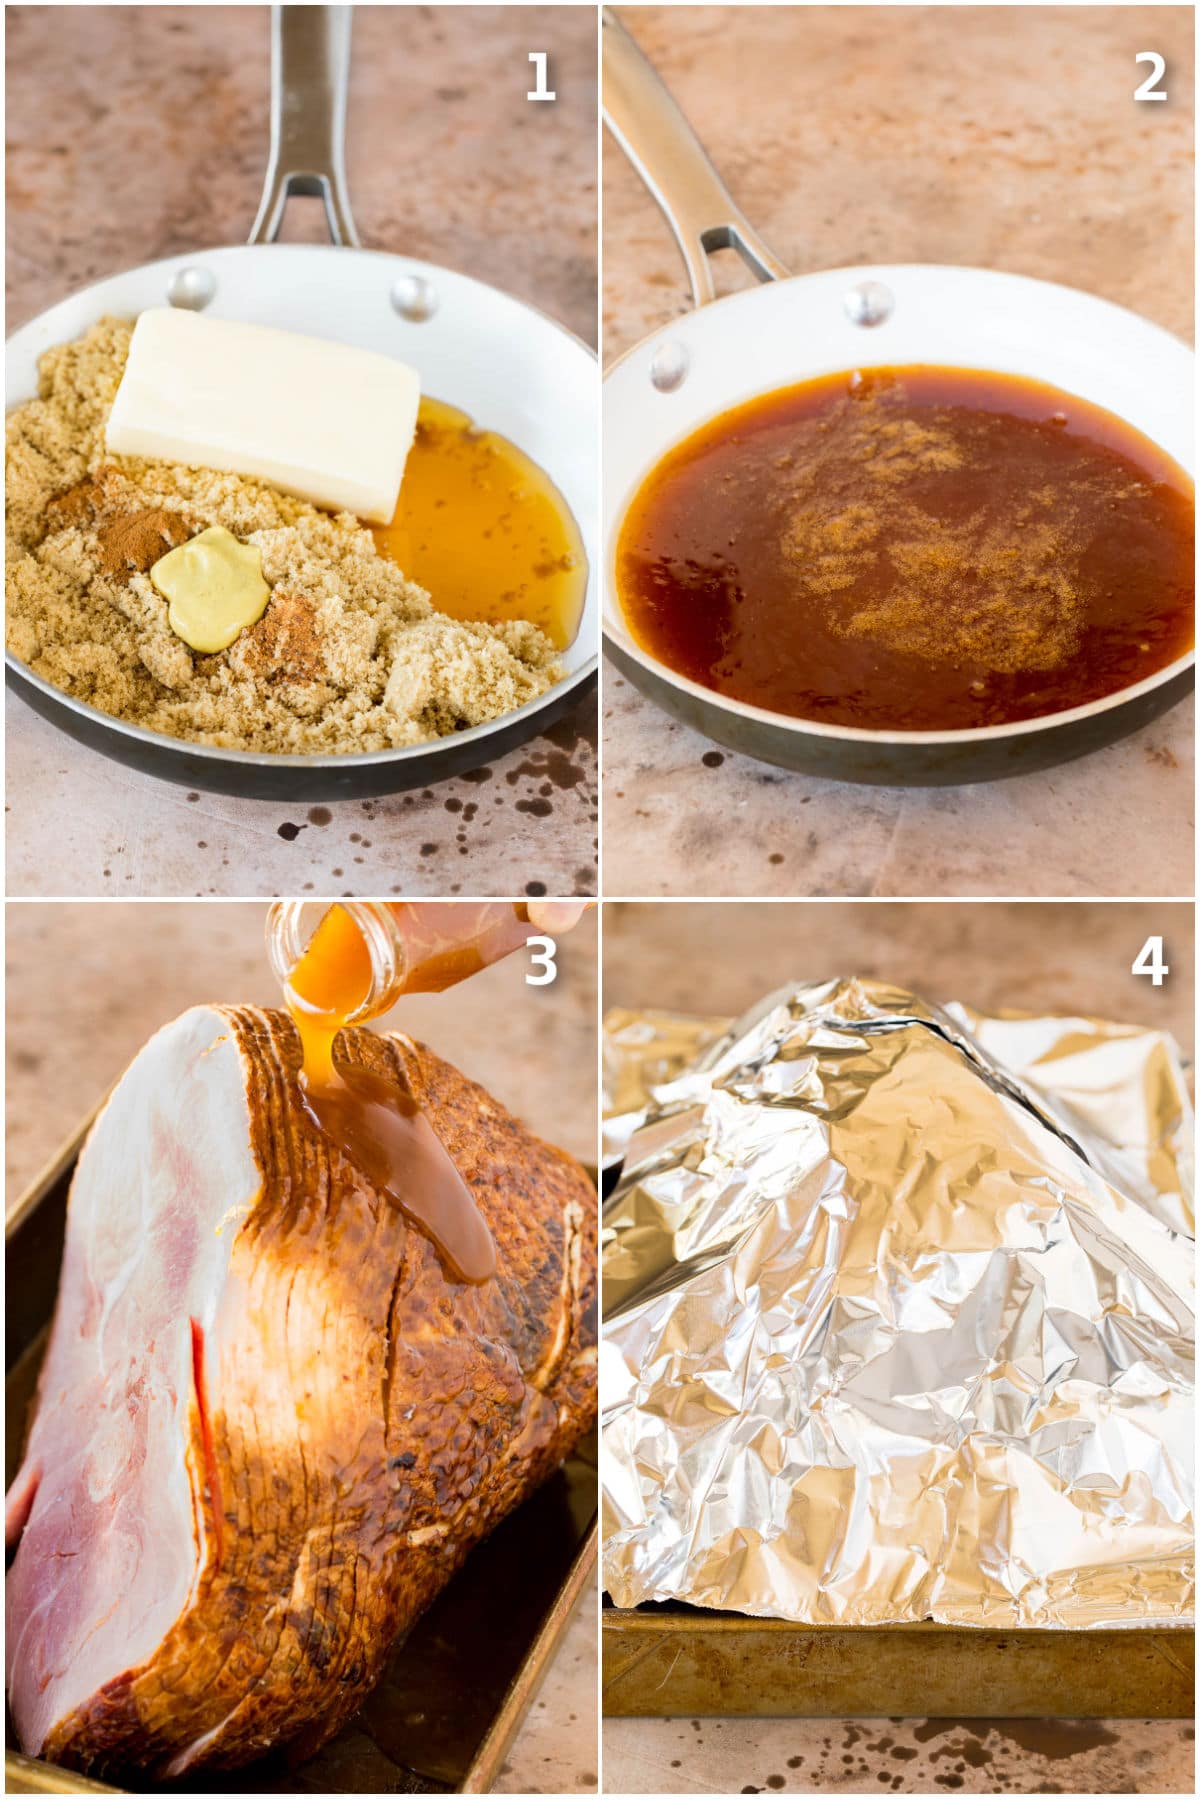 A collage showing how to make glaze and bake a ham.